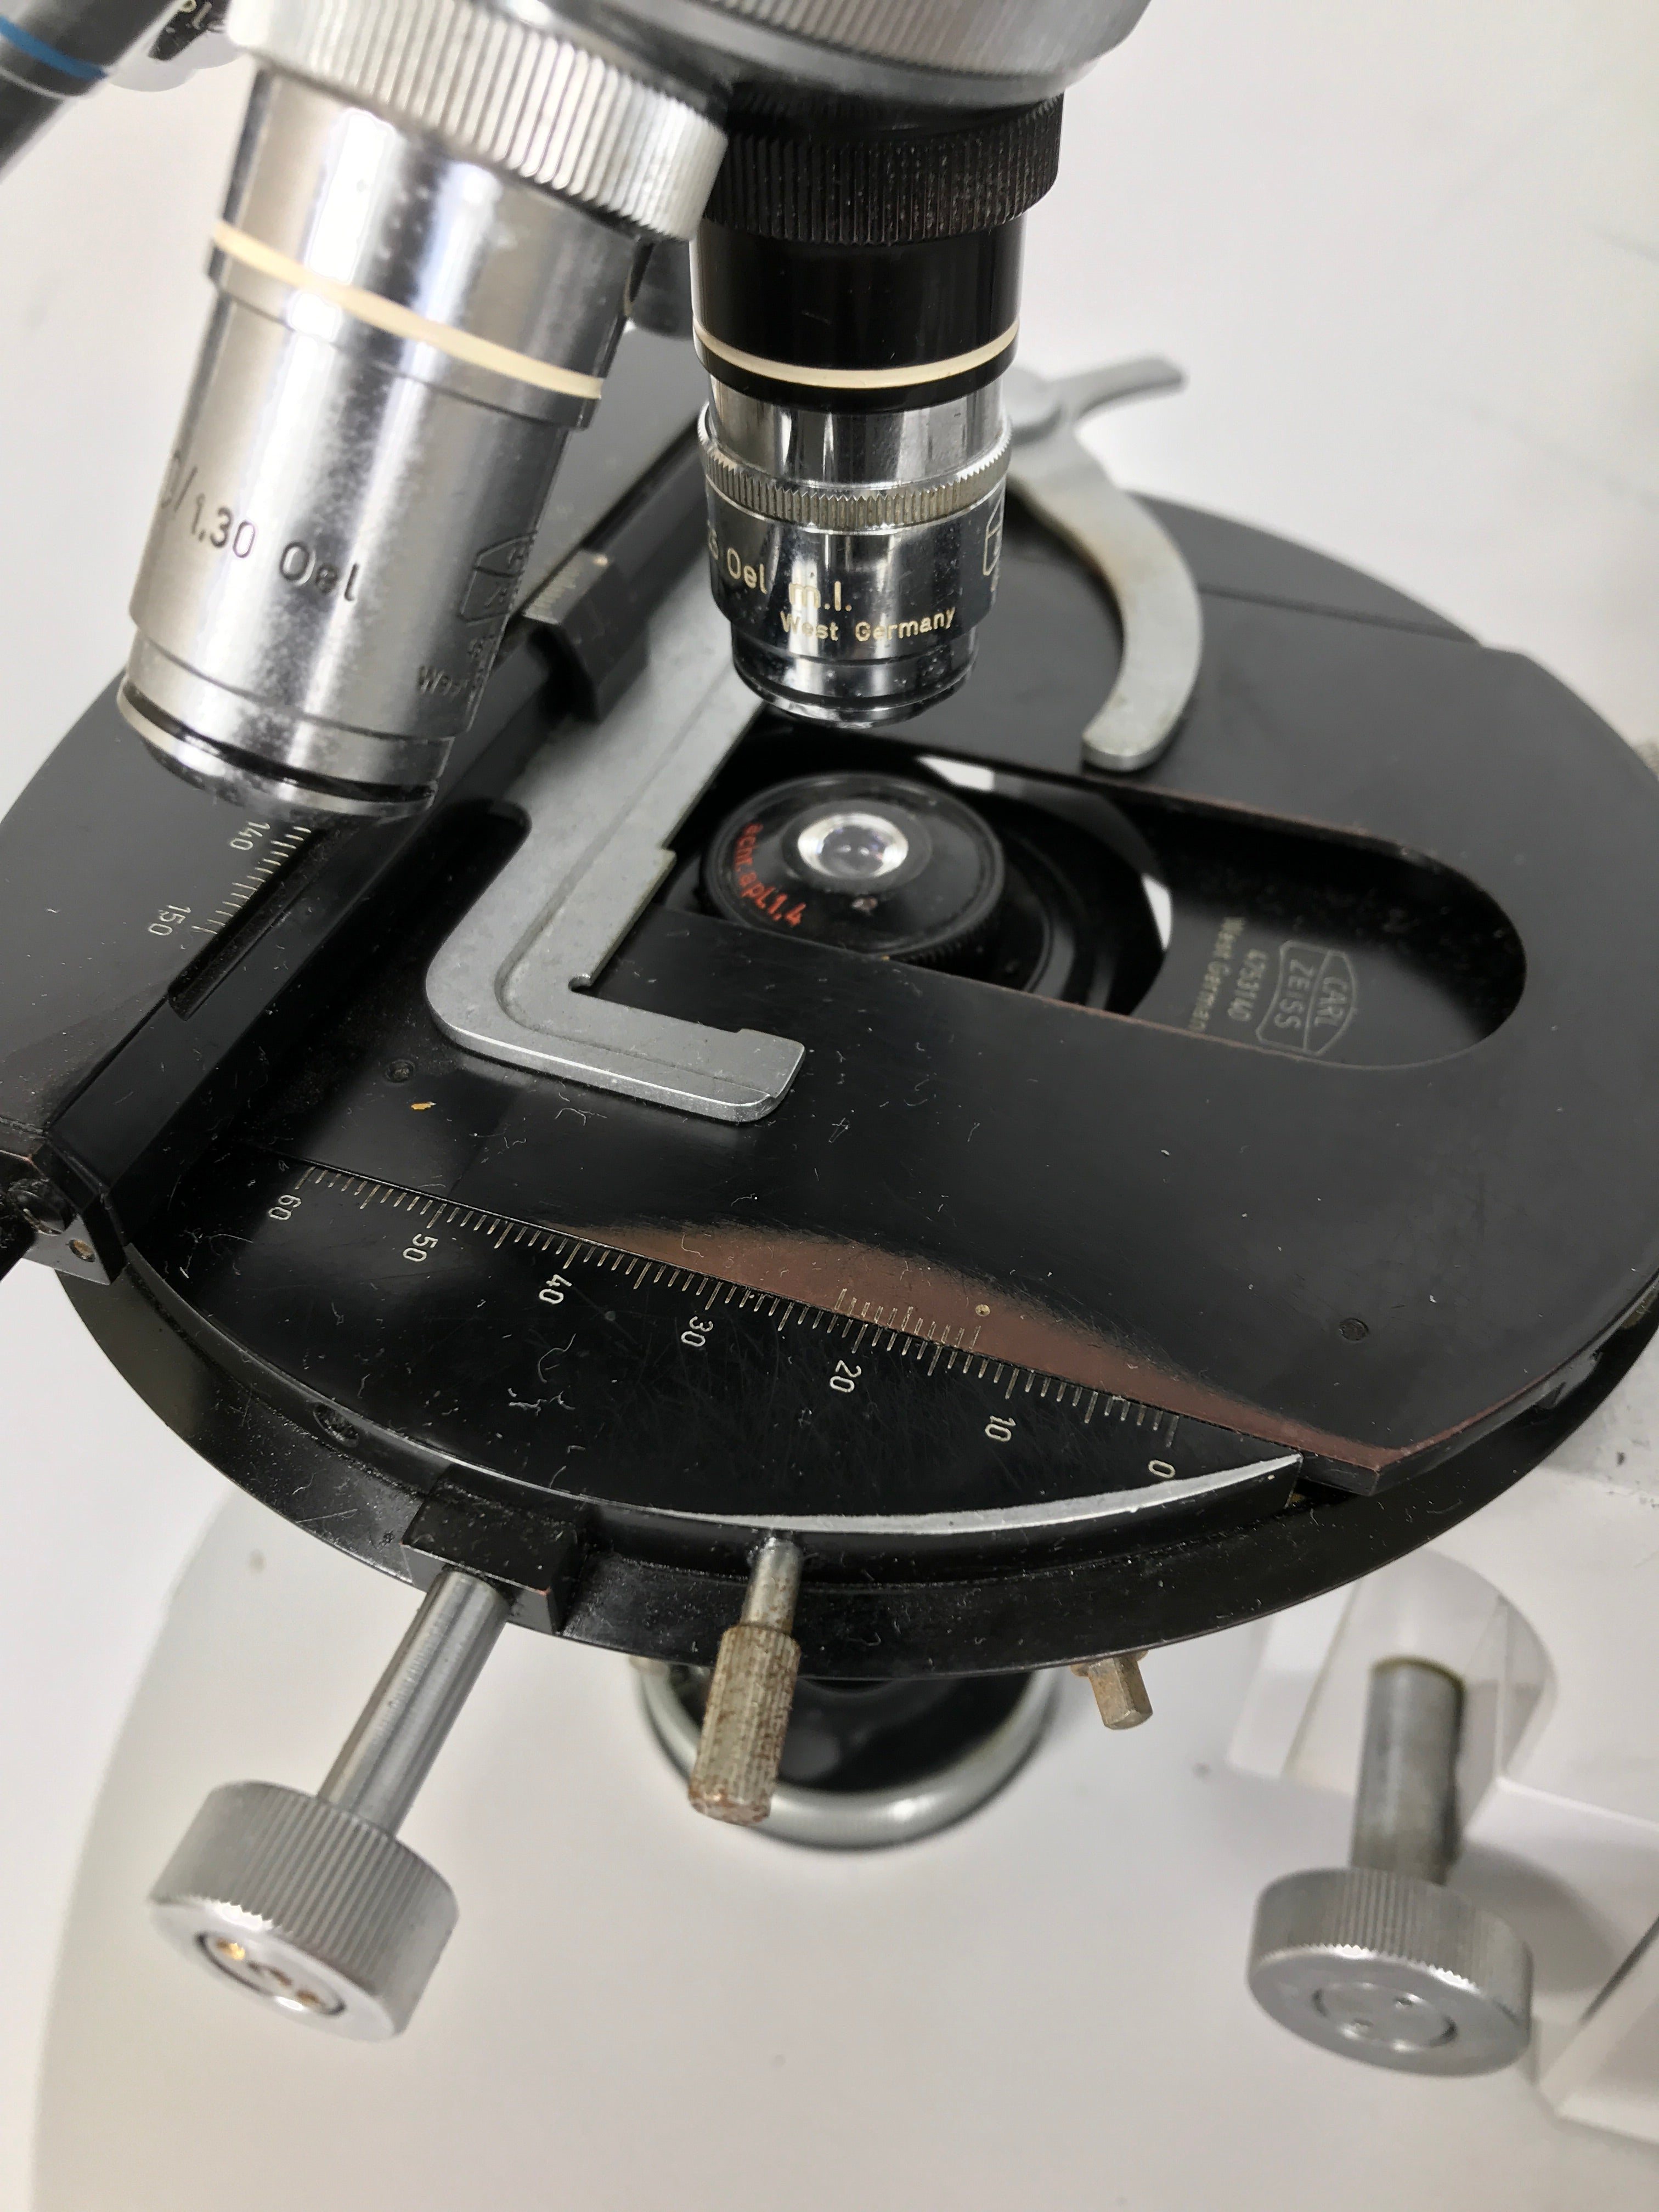 Carl Zeiss Universal Trinocular Fluorescence Microscope with 5 Objectives & Power Supply